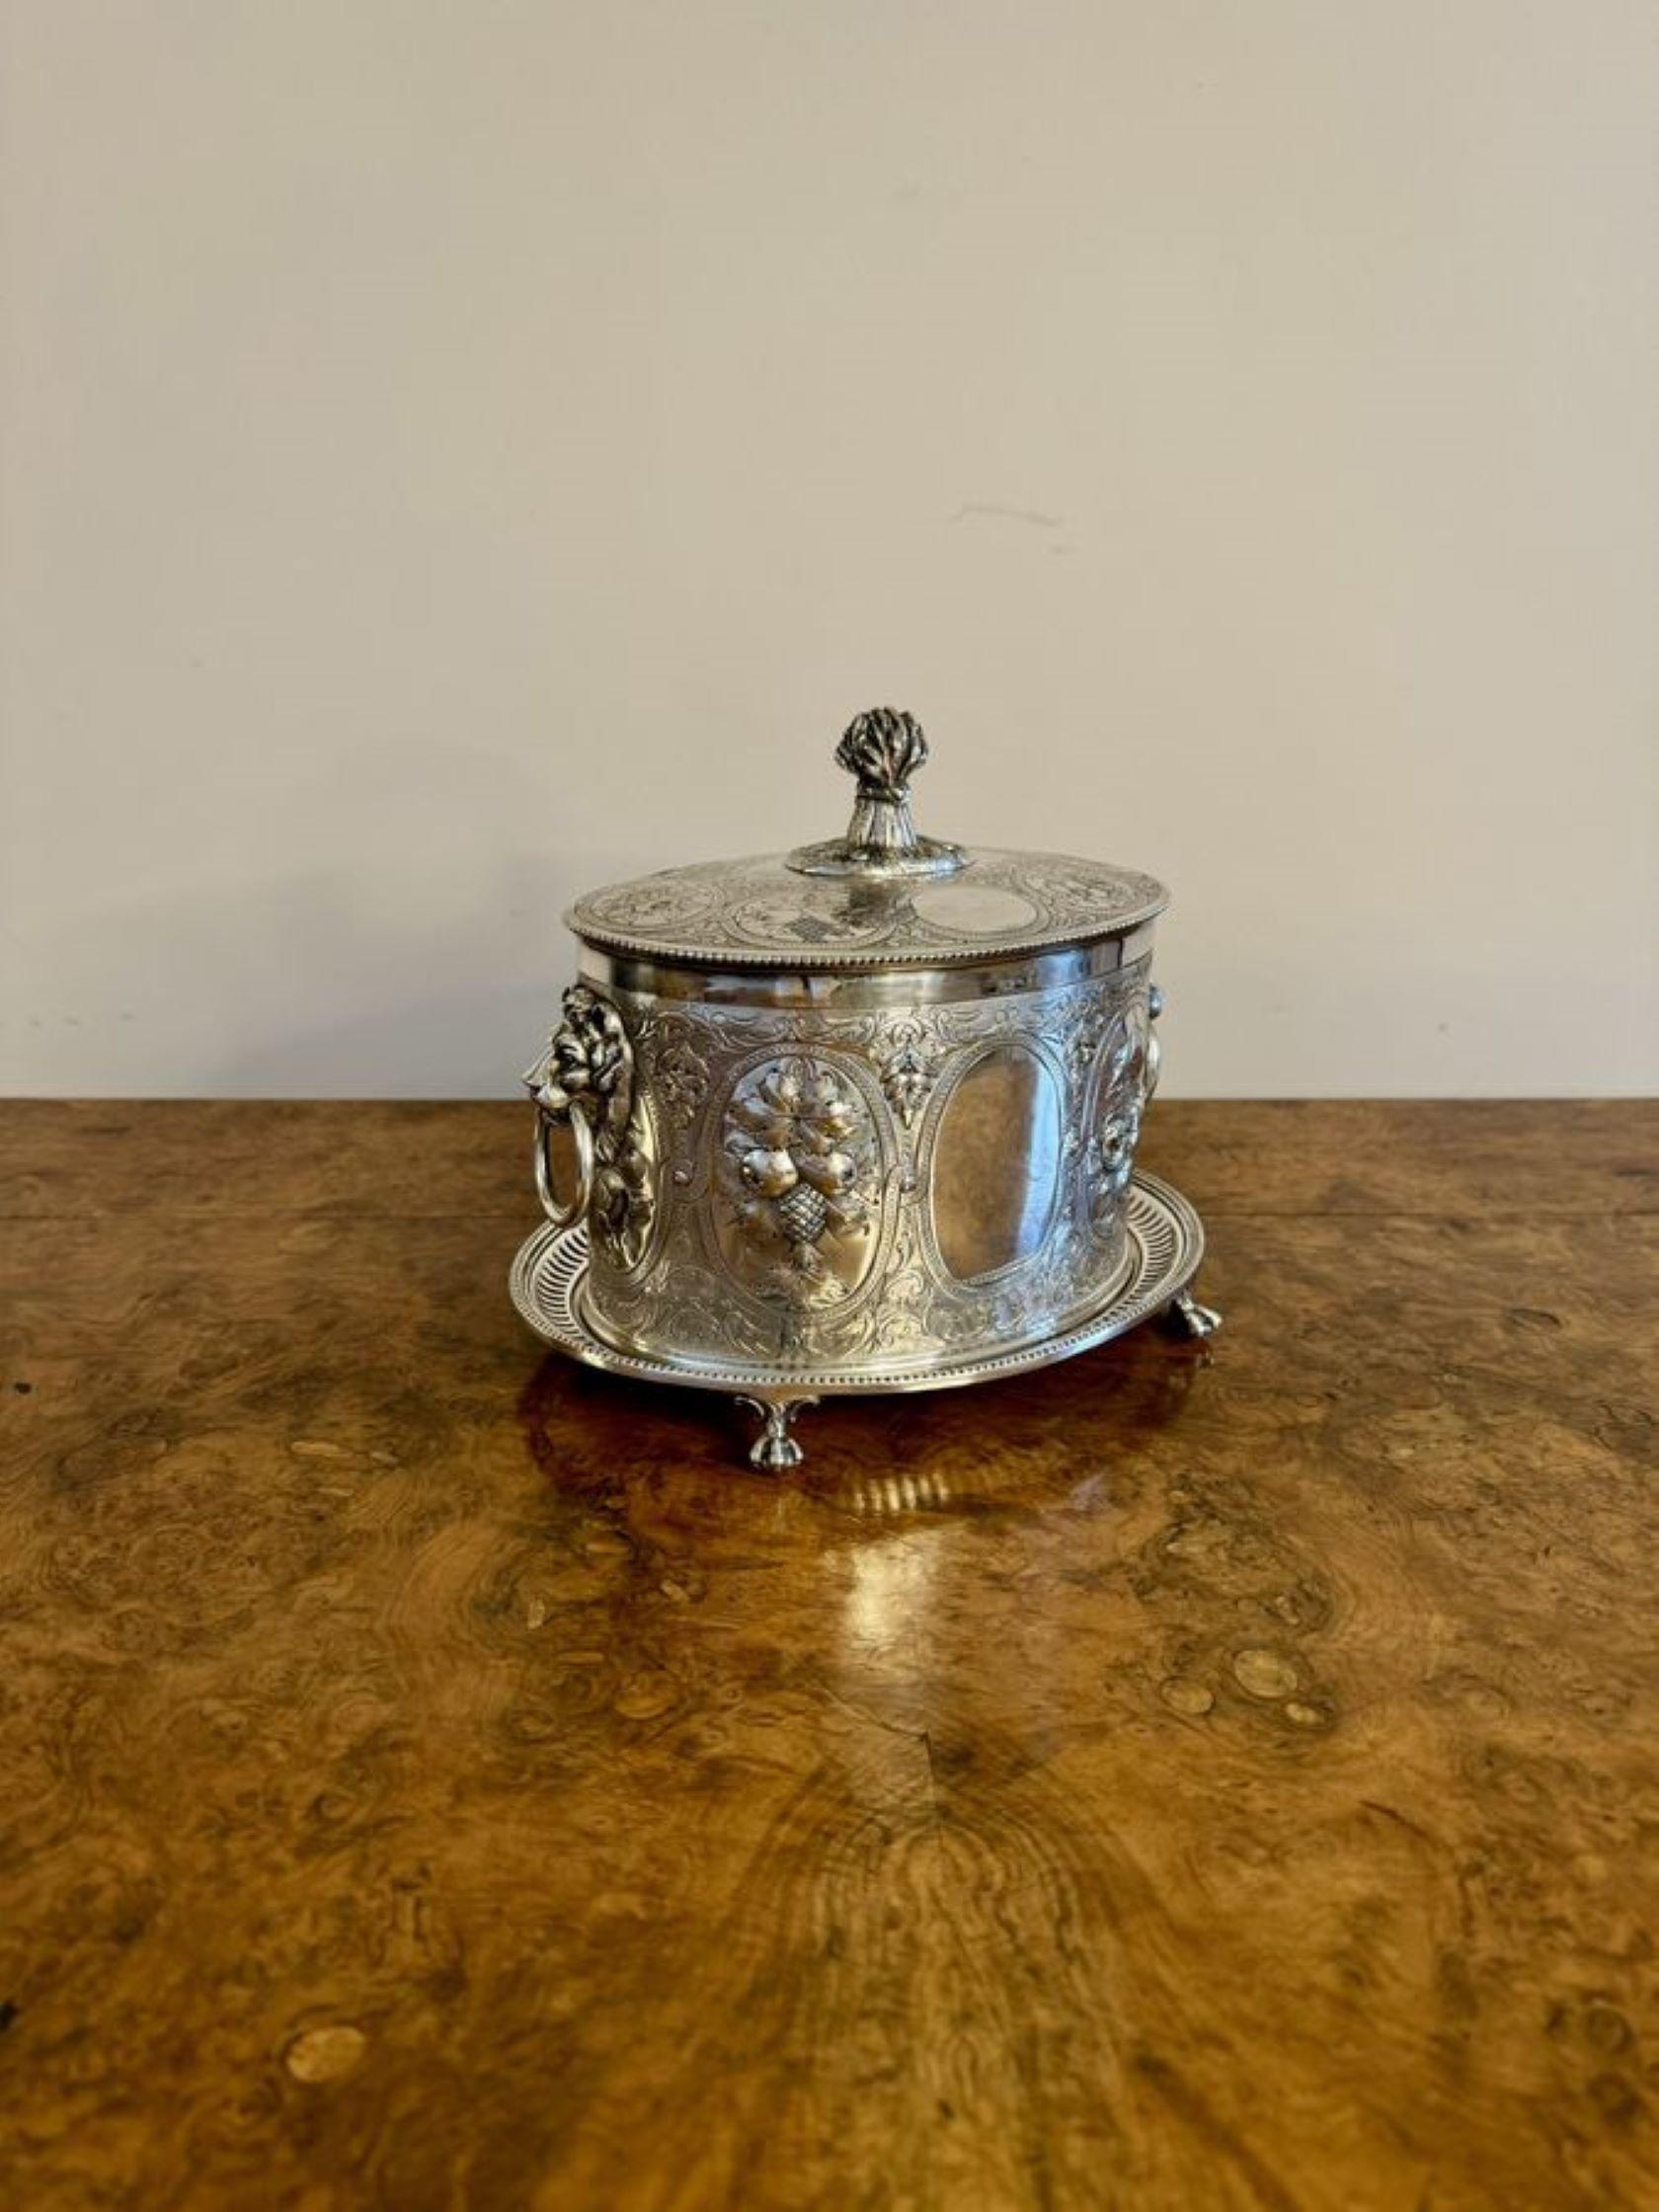 Outstanding quality antique Edwardian ornate silver plated biscuit barrel  For Sale 4